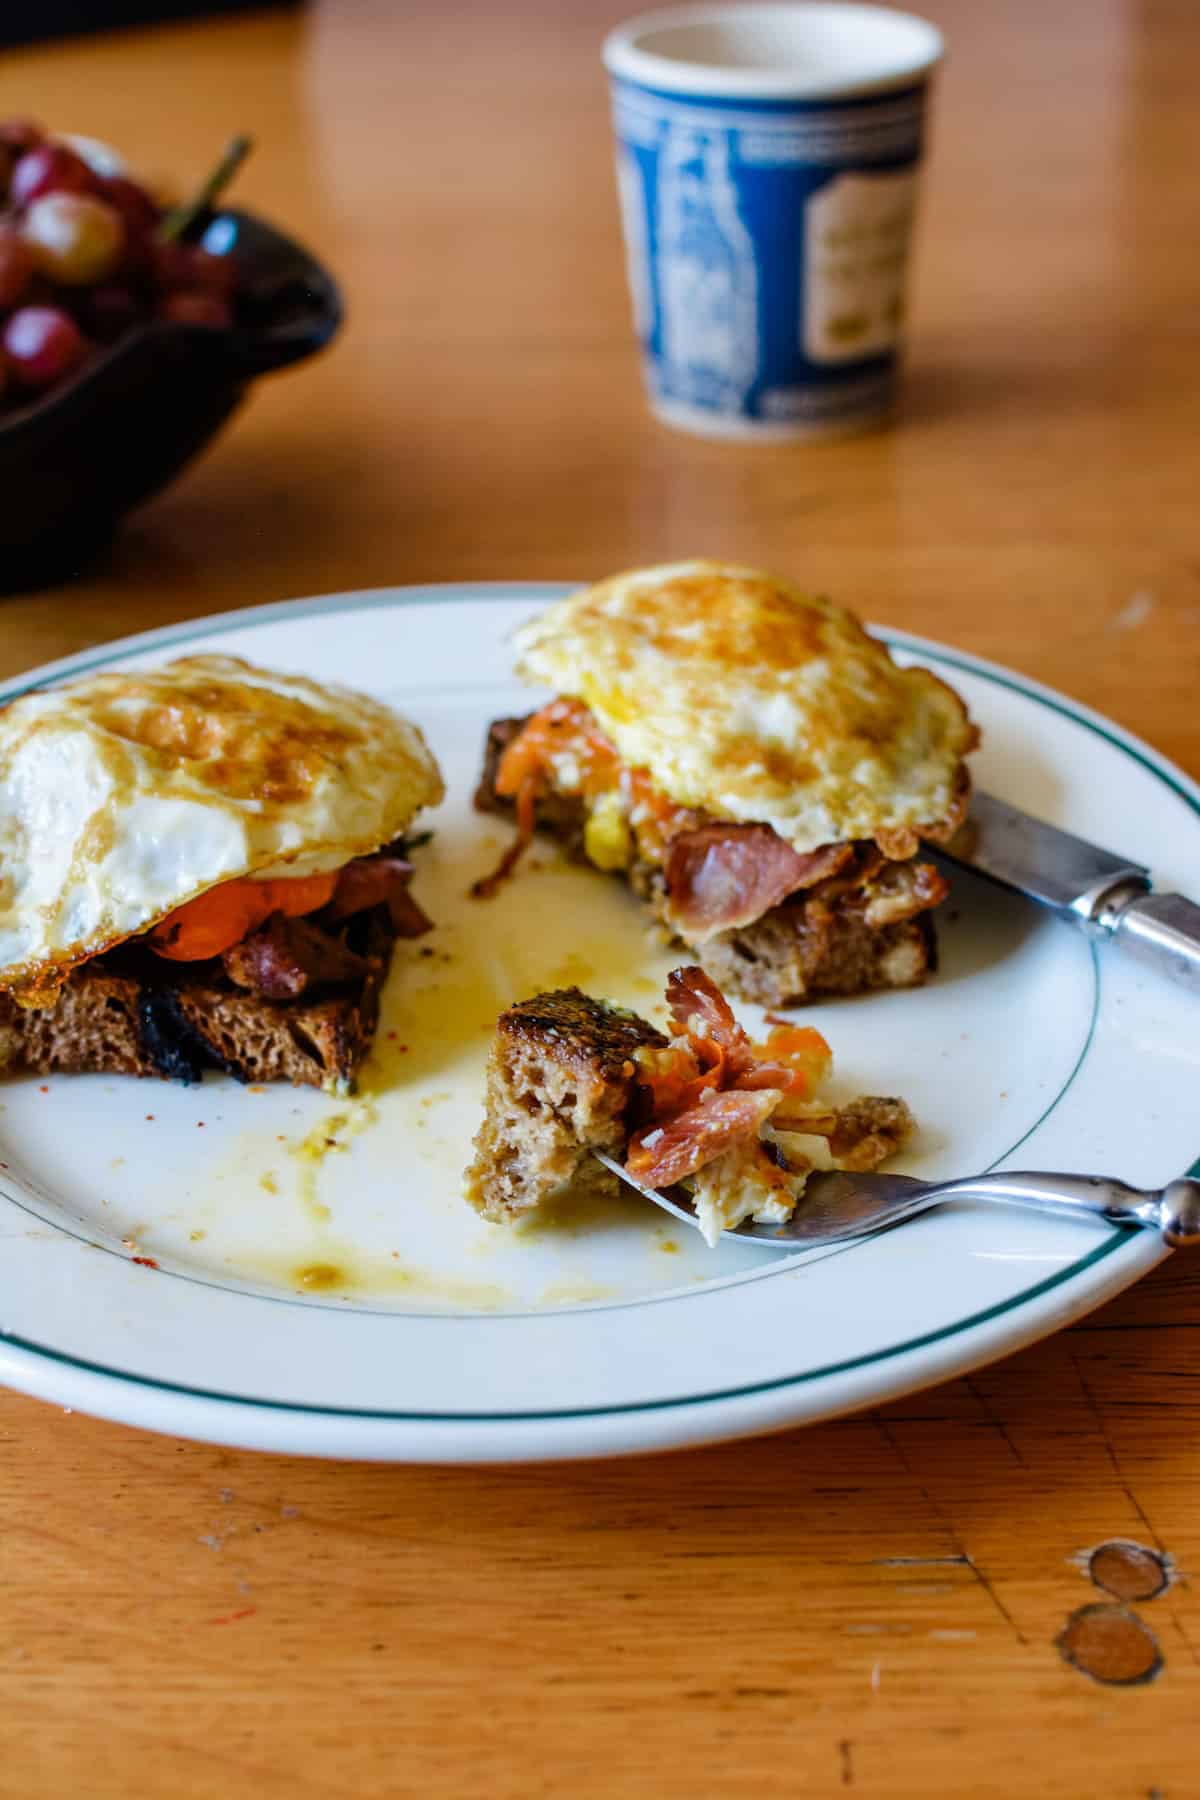 Such a delicious breakfast recipe: Slices of rustic bread rubbed with garlic and topped with ham, roasted tomatoes and mushrooms, and a fried egg.